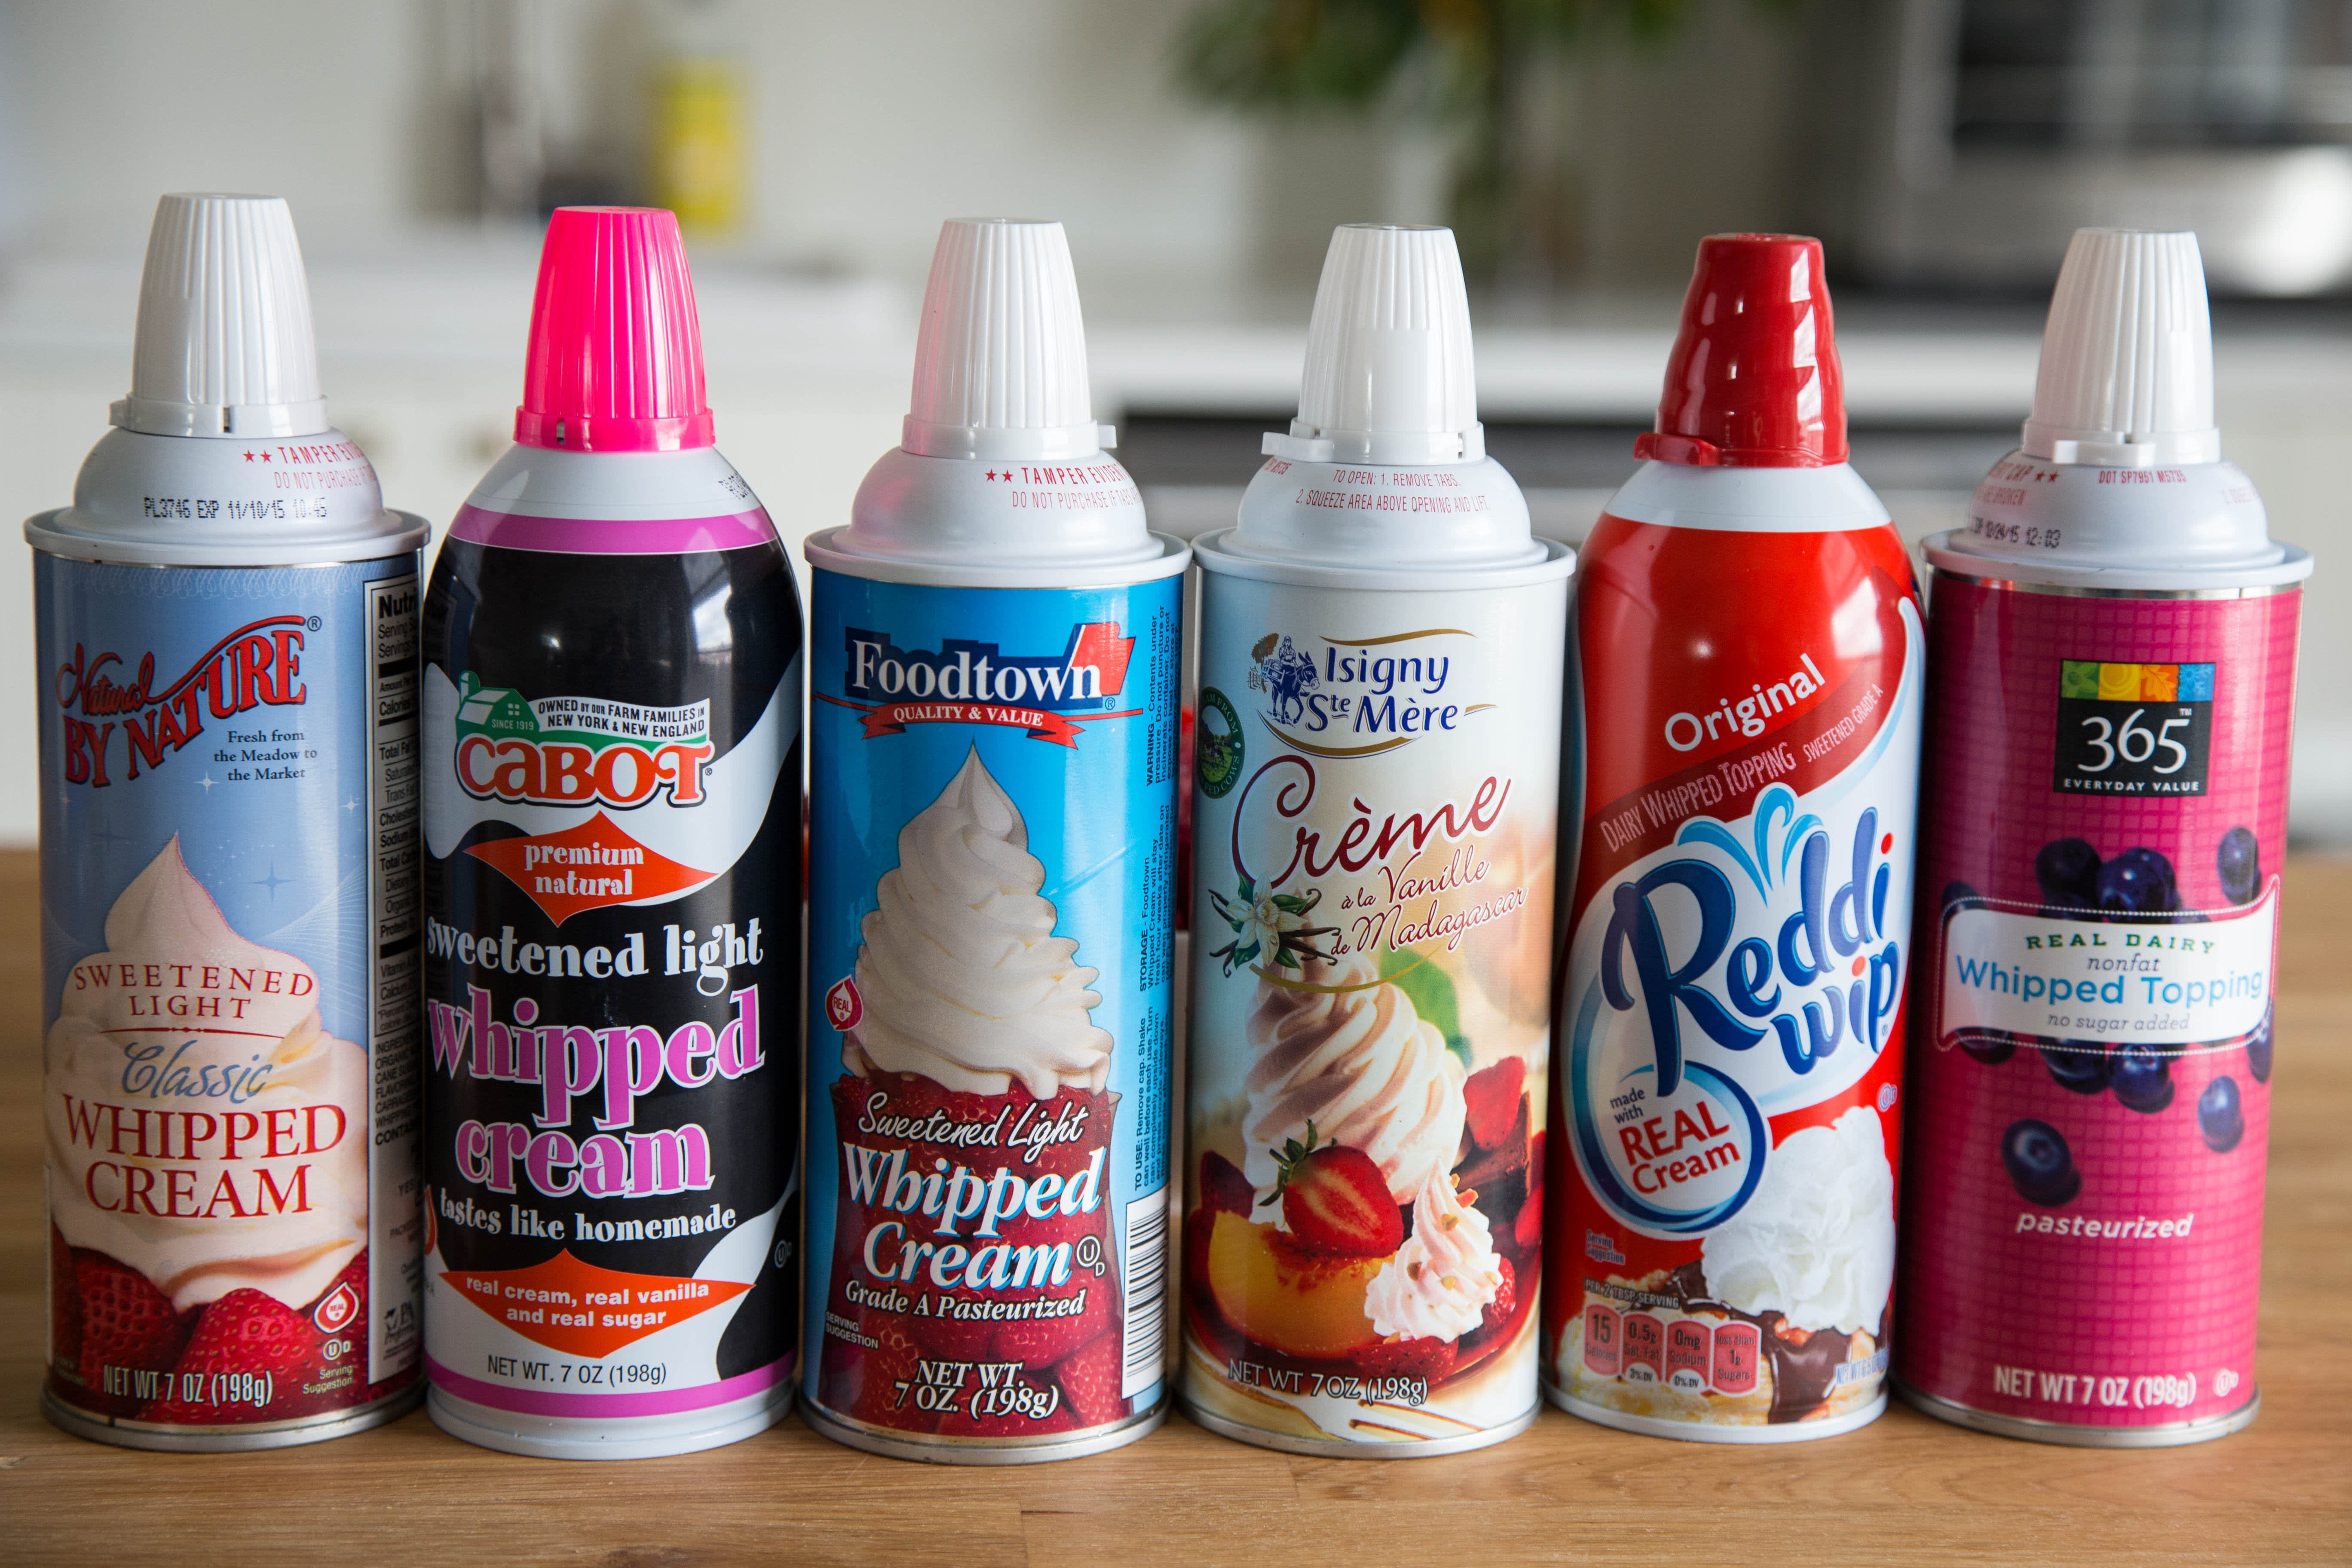 The Whipped Cream Taste Test We Tried 6 Brands And Here’s Our Favorite Kitchn